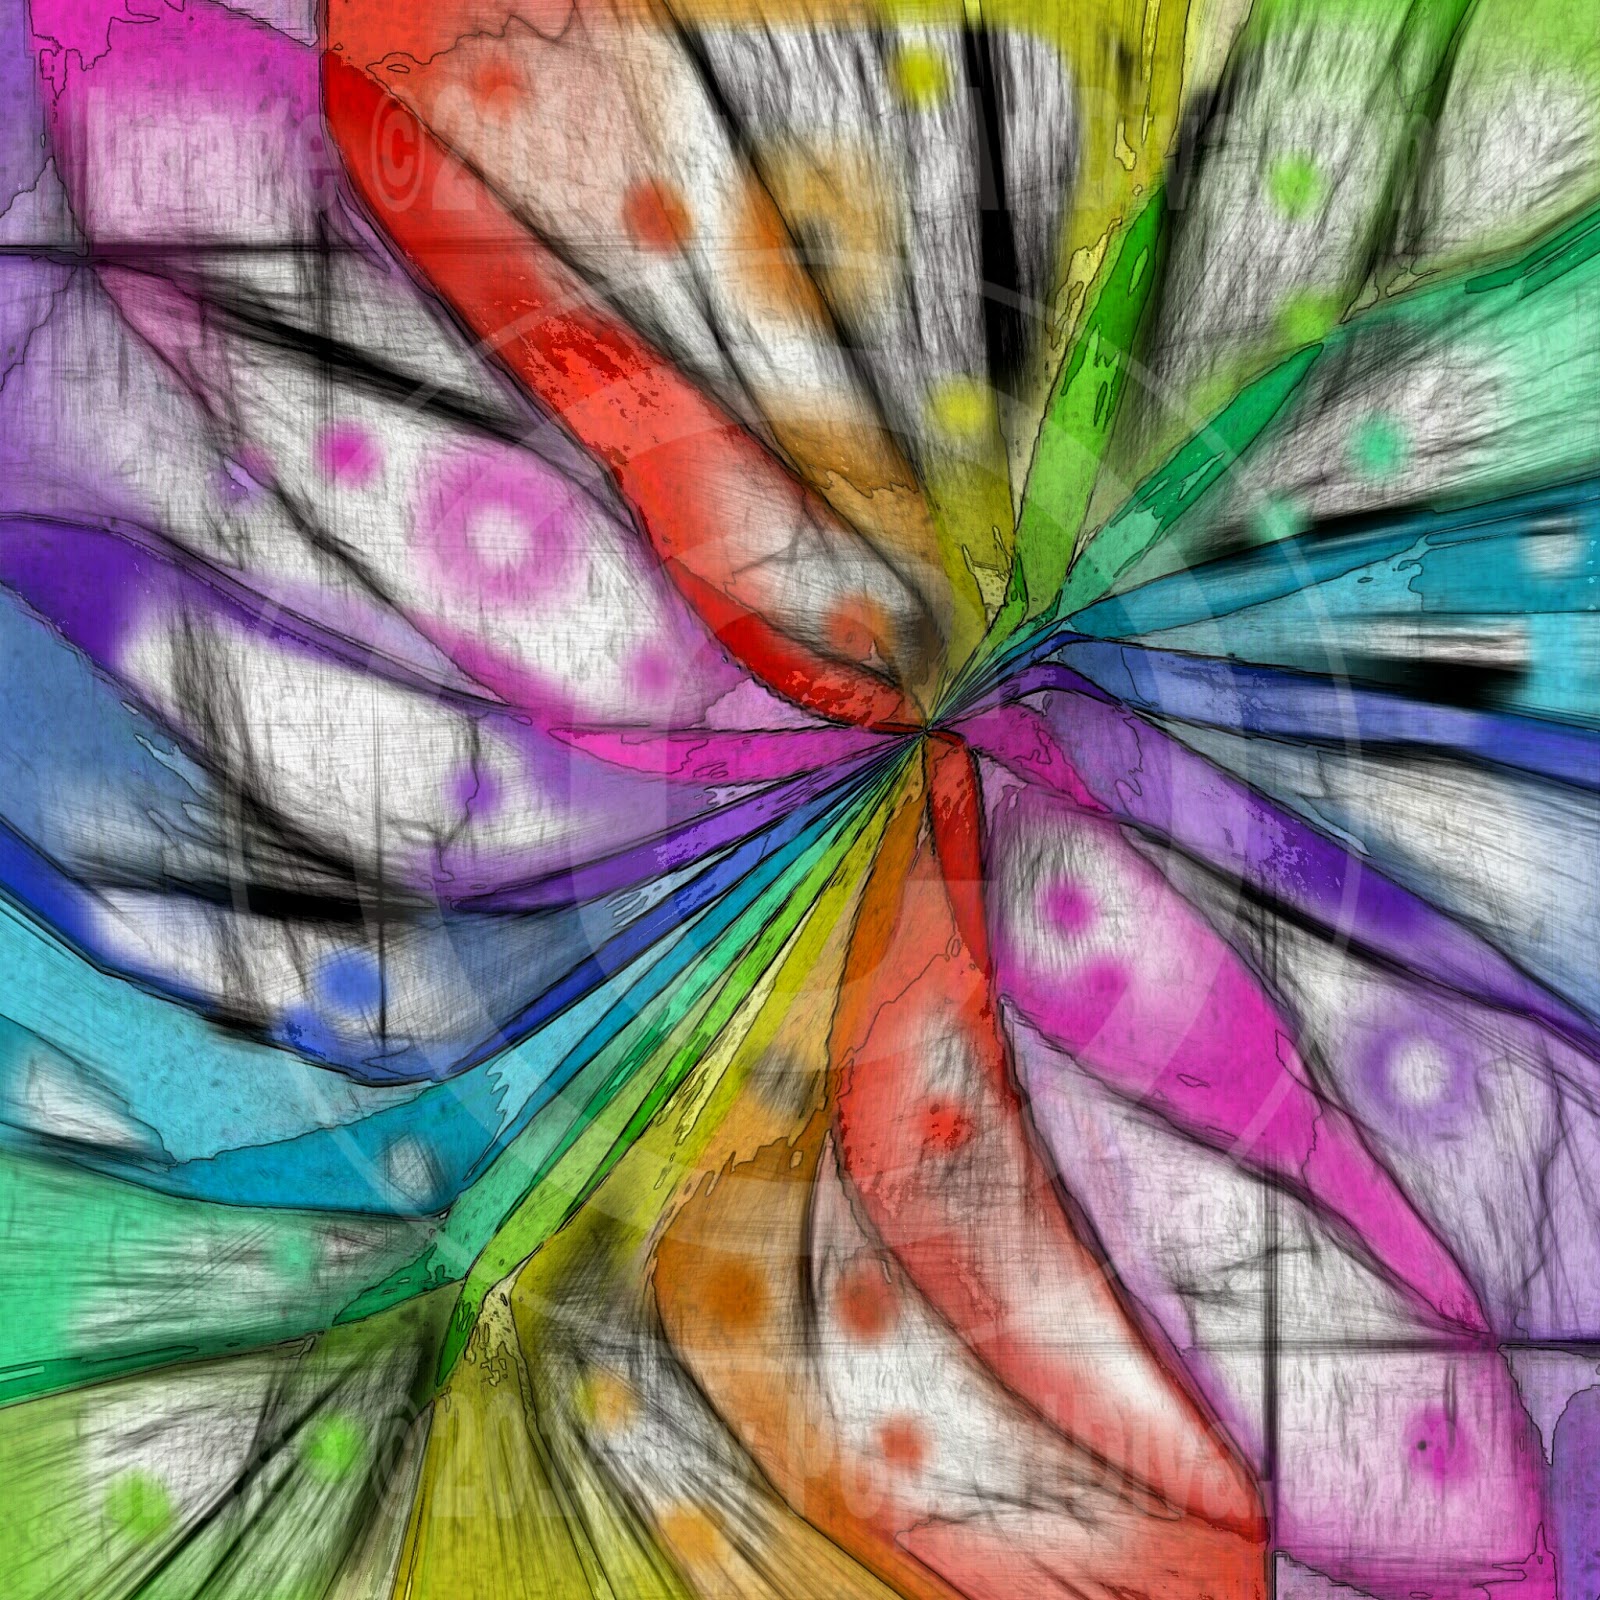 http://store.payloadz.com/details/2084288-photos-and-images-clip-art-kaleidoscope-abstract-dragonfly-web-graphic.html